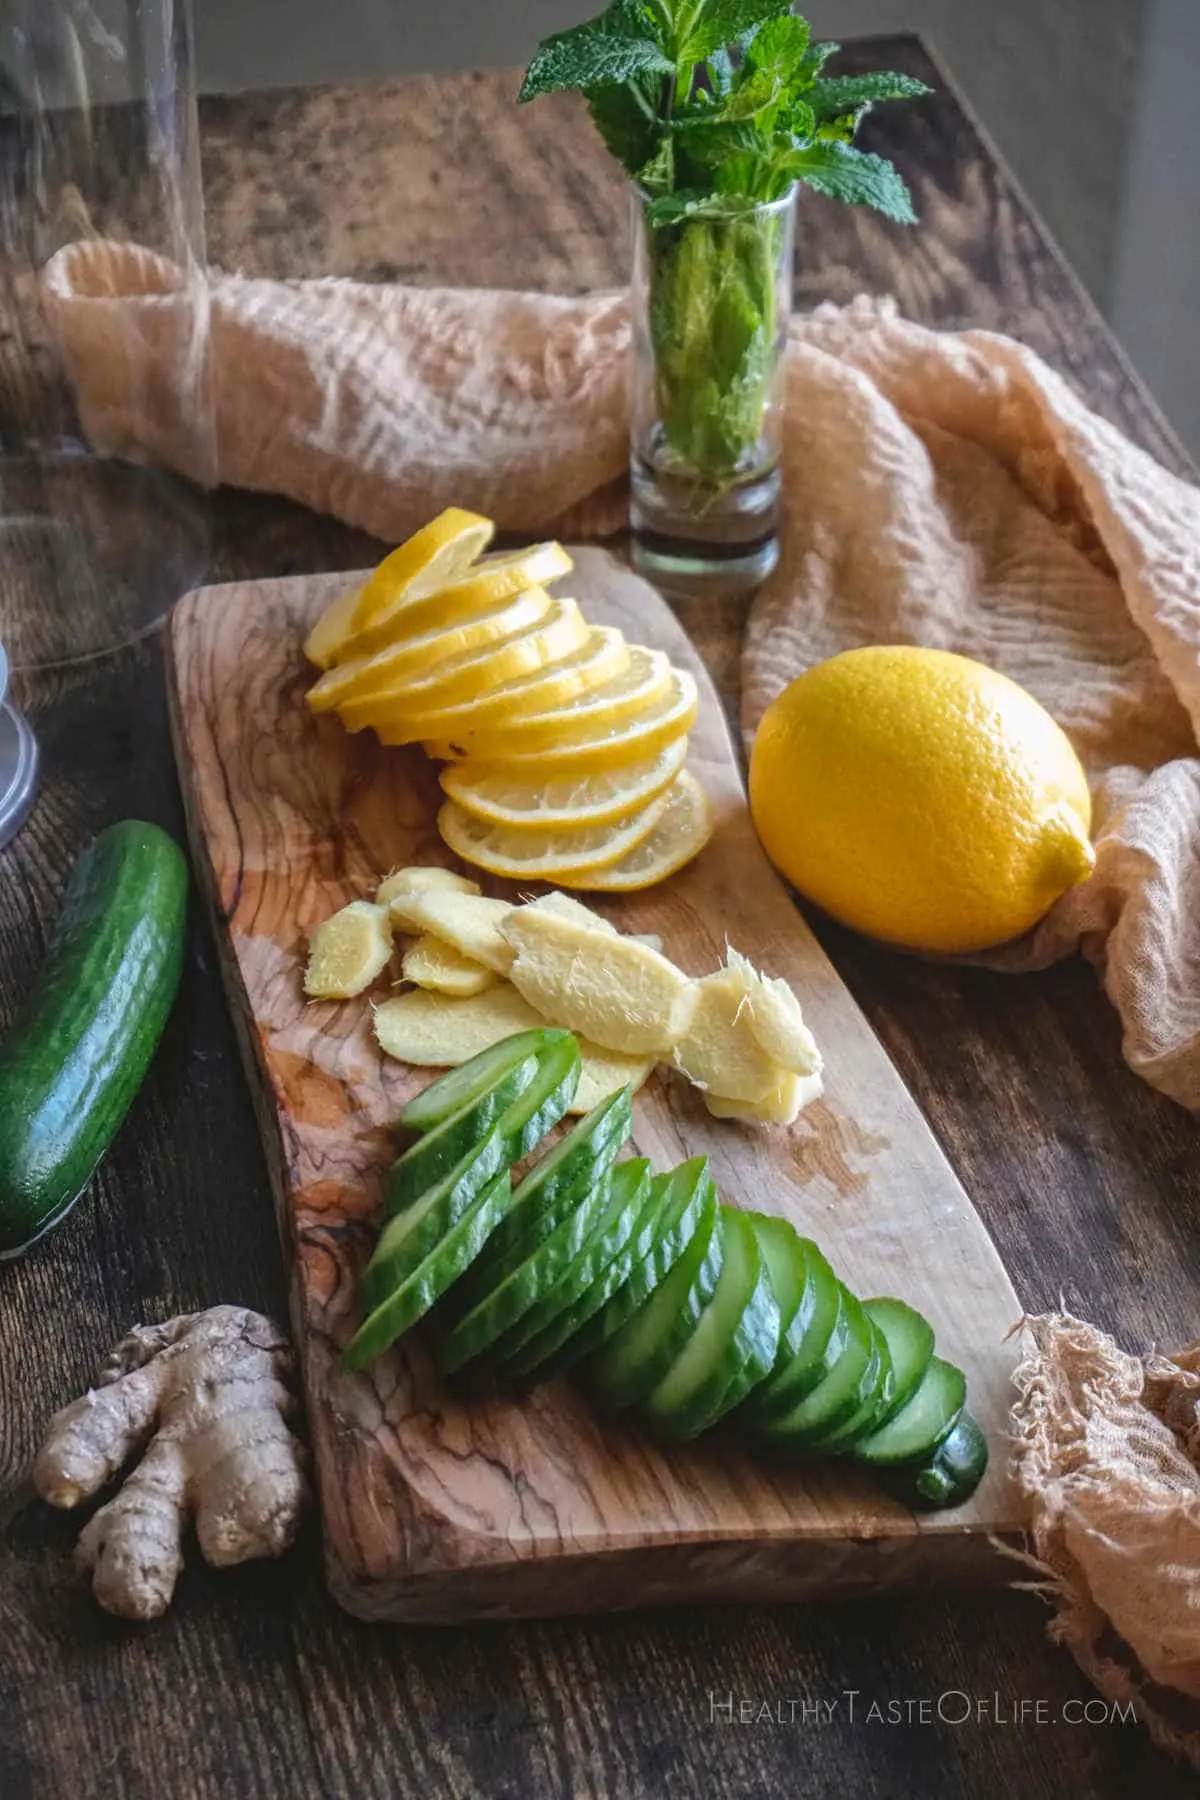 Picture showing the ingredients needed to make this cucumber lemon ginger water - all displayed ona board and cut into slices.